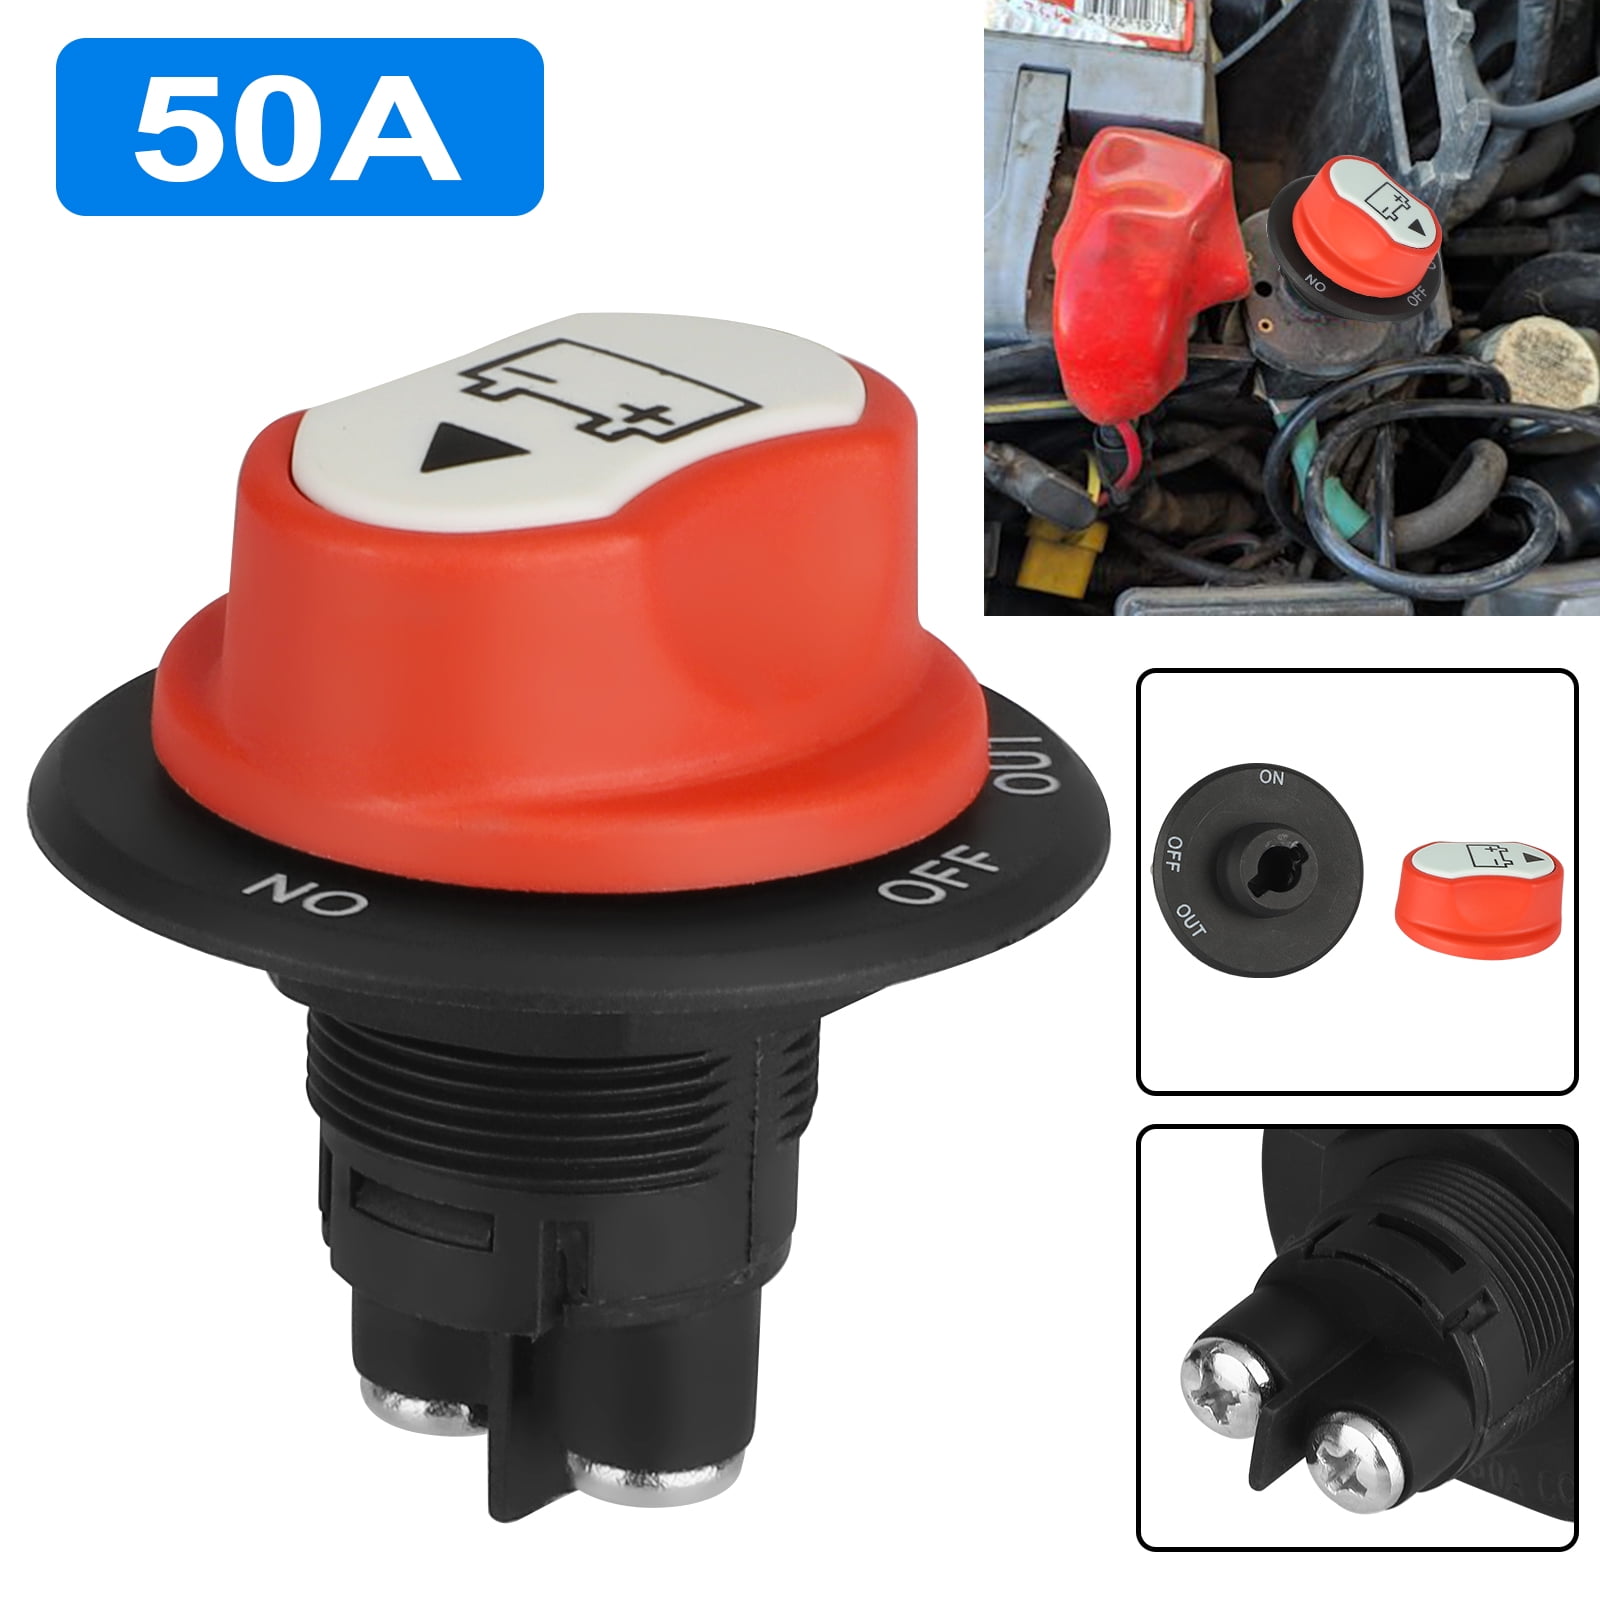 Car Battery Switch,Max 50V DC 50A CONT 75A INT On/Off Car Battery Isolator Switch Power Cut Off Switch Battery Isolator Switch for Cars Off Road Vehicle Trucks 